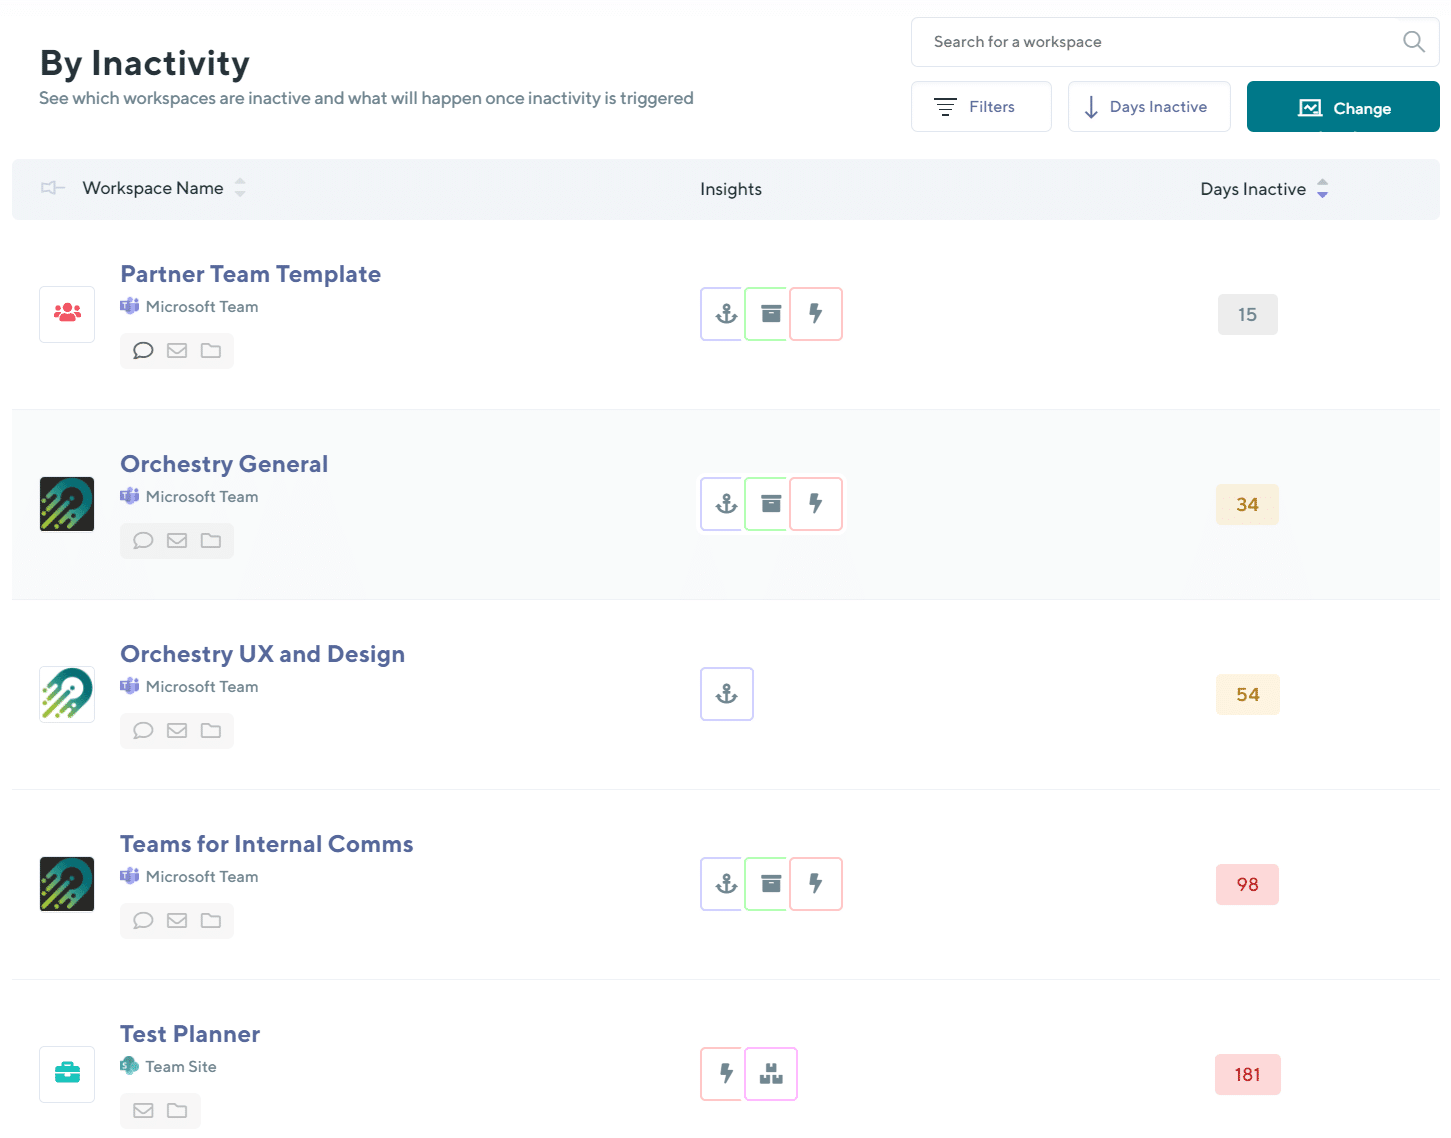 orchestry work made simple - inactivity insights